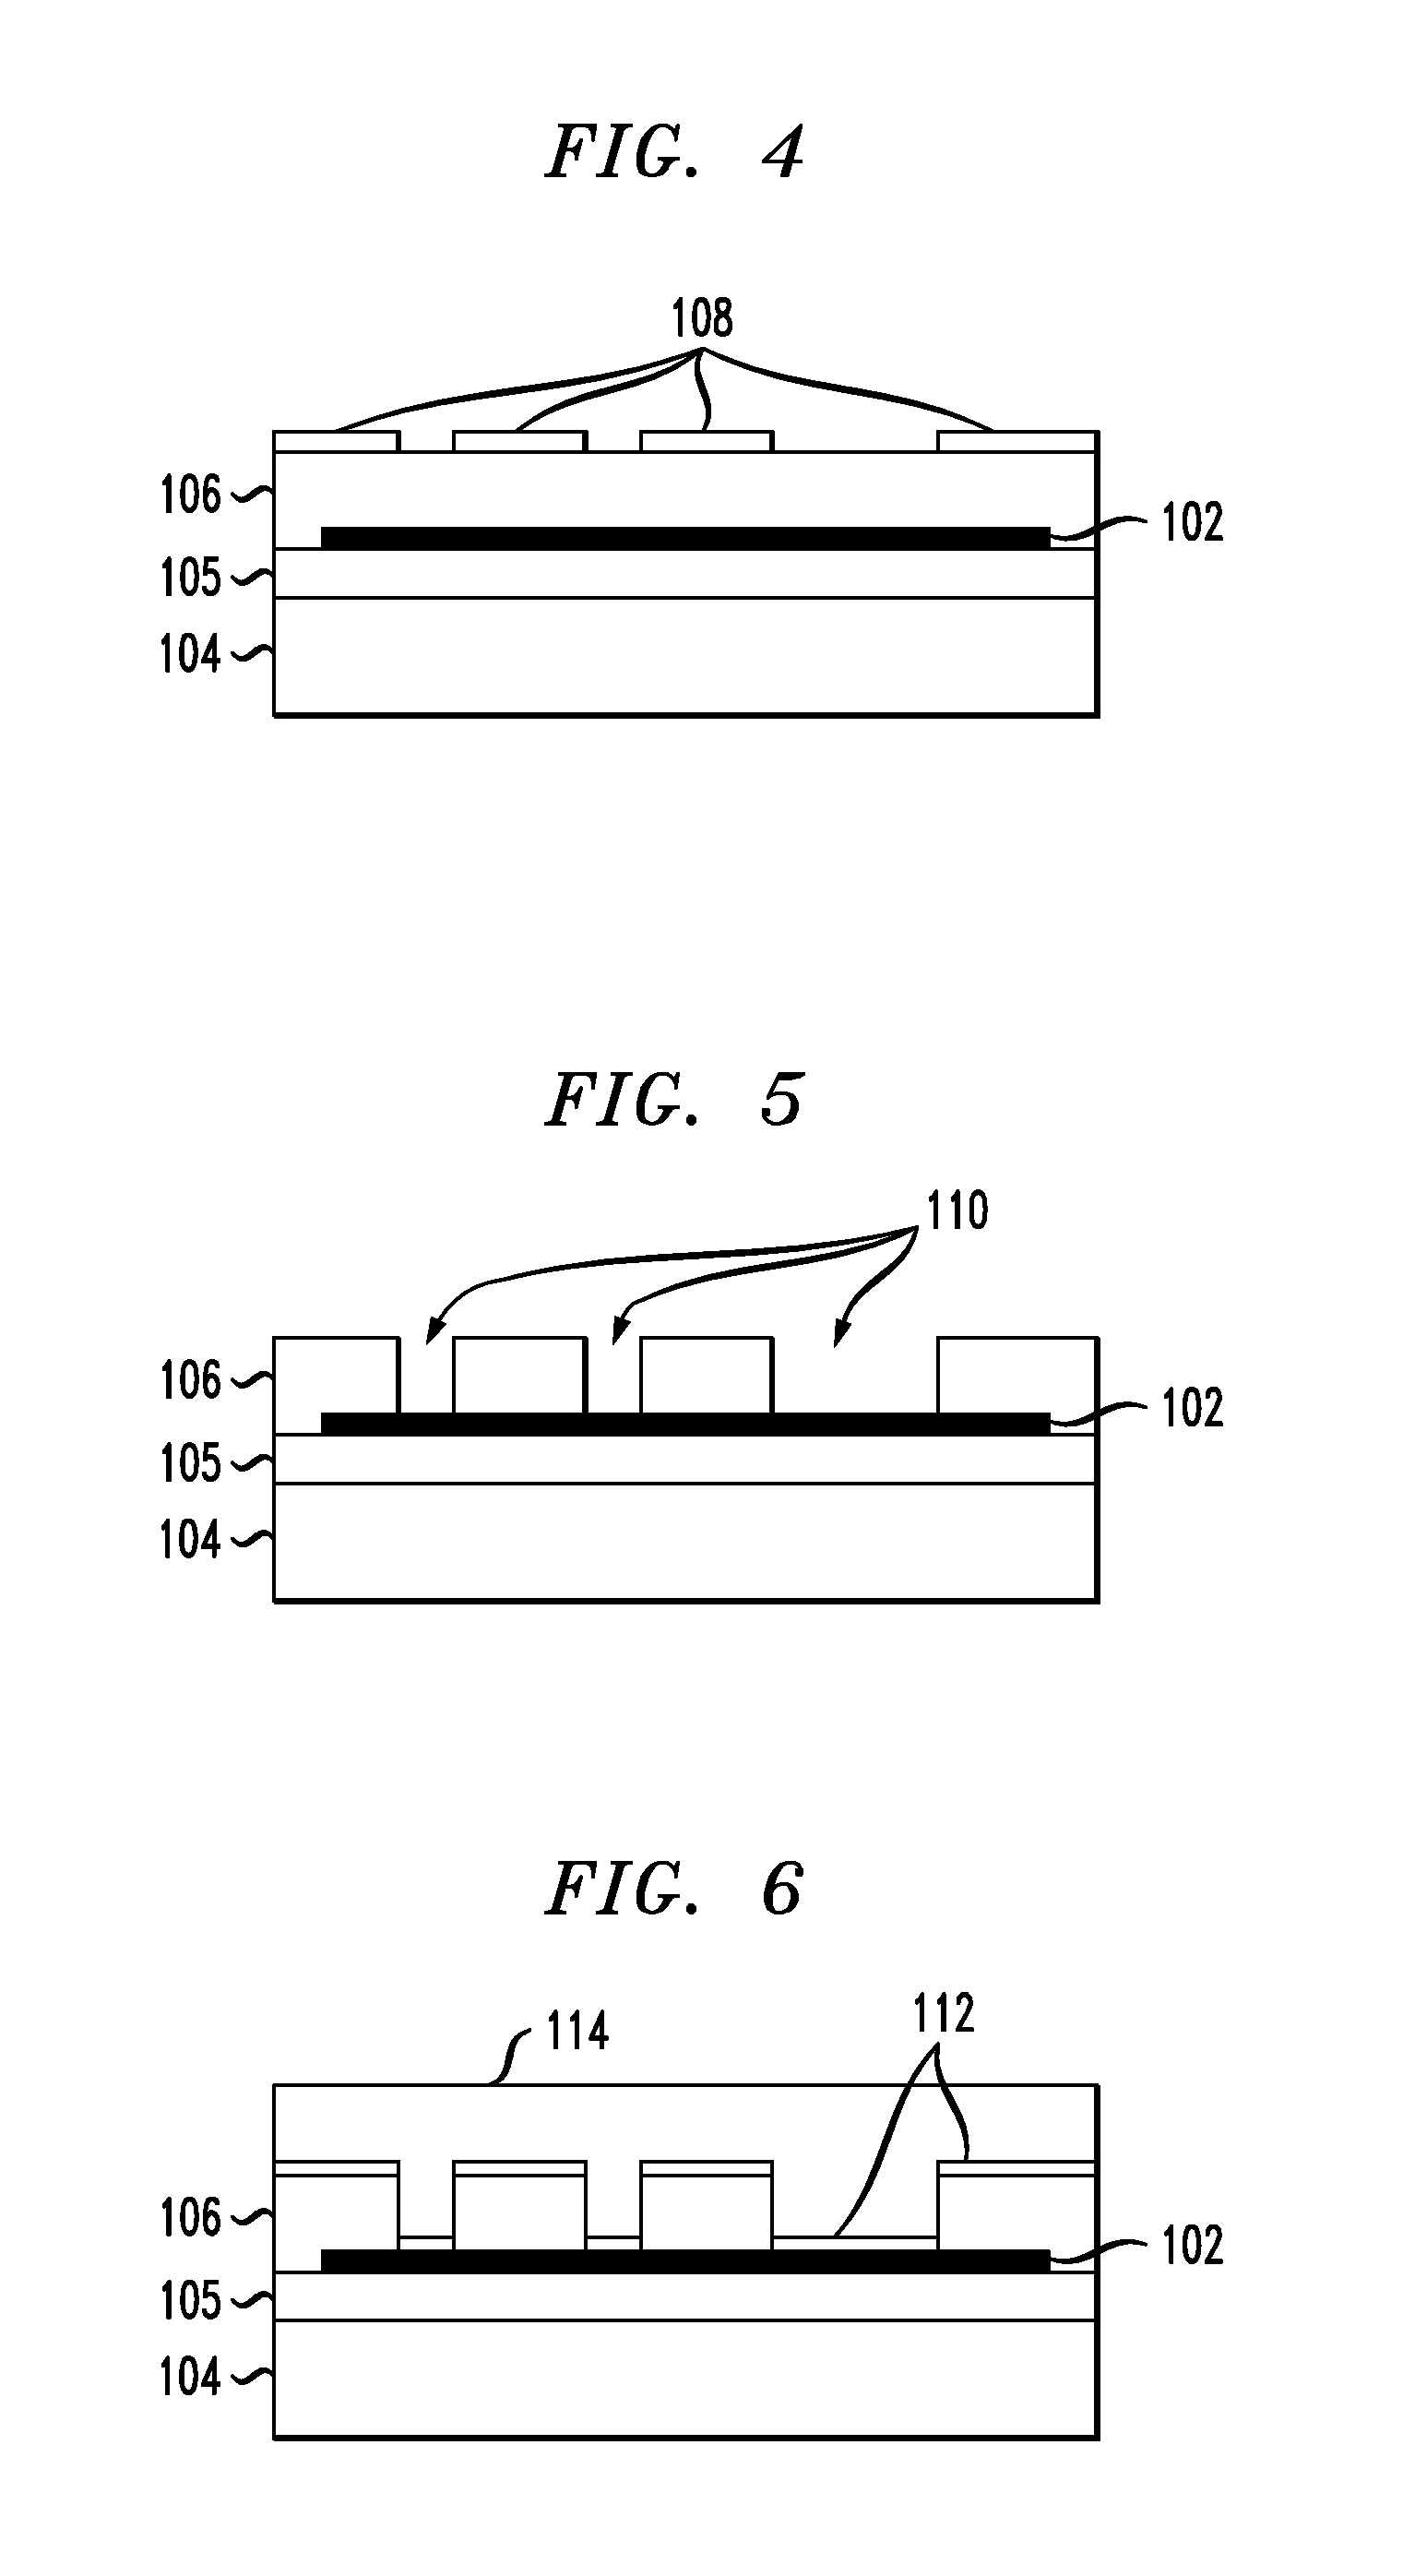 Method to fabricate high performance carbon nanotube transistor integrated circuits by three-dimensional integration technology